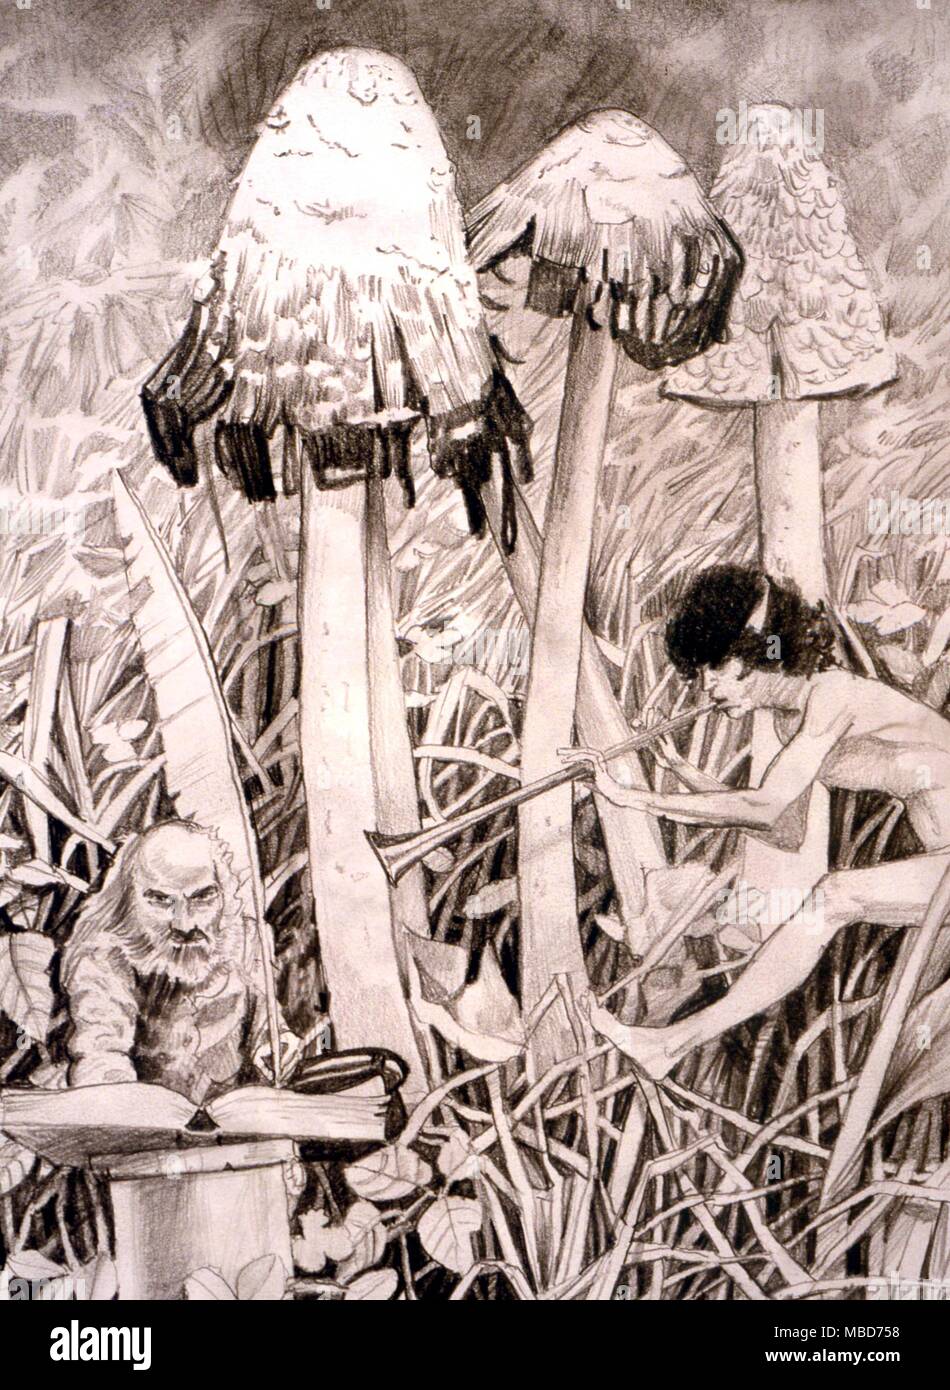 Fairies - Troll - The fairy scribe, or Troll, with a spell-casting fairy. Drawing by Gordon Wain, 1989, in the collection of Charles Walker. Stock Photo